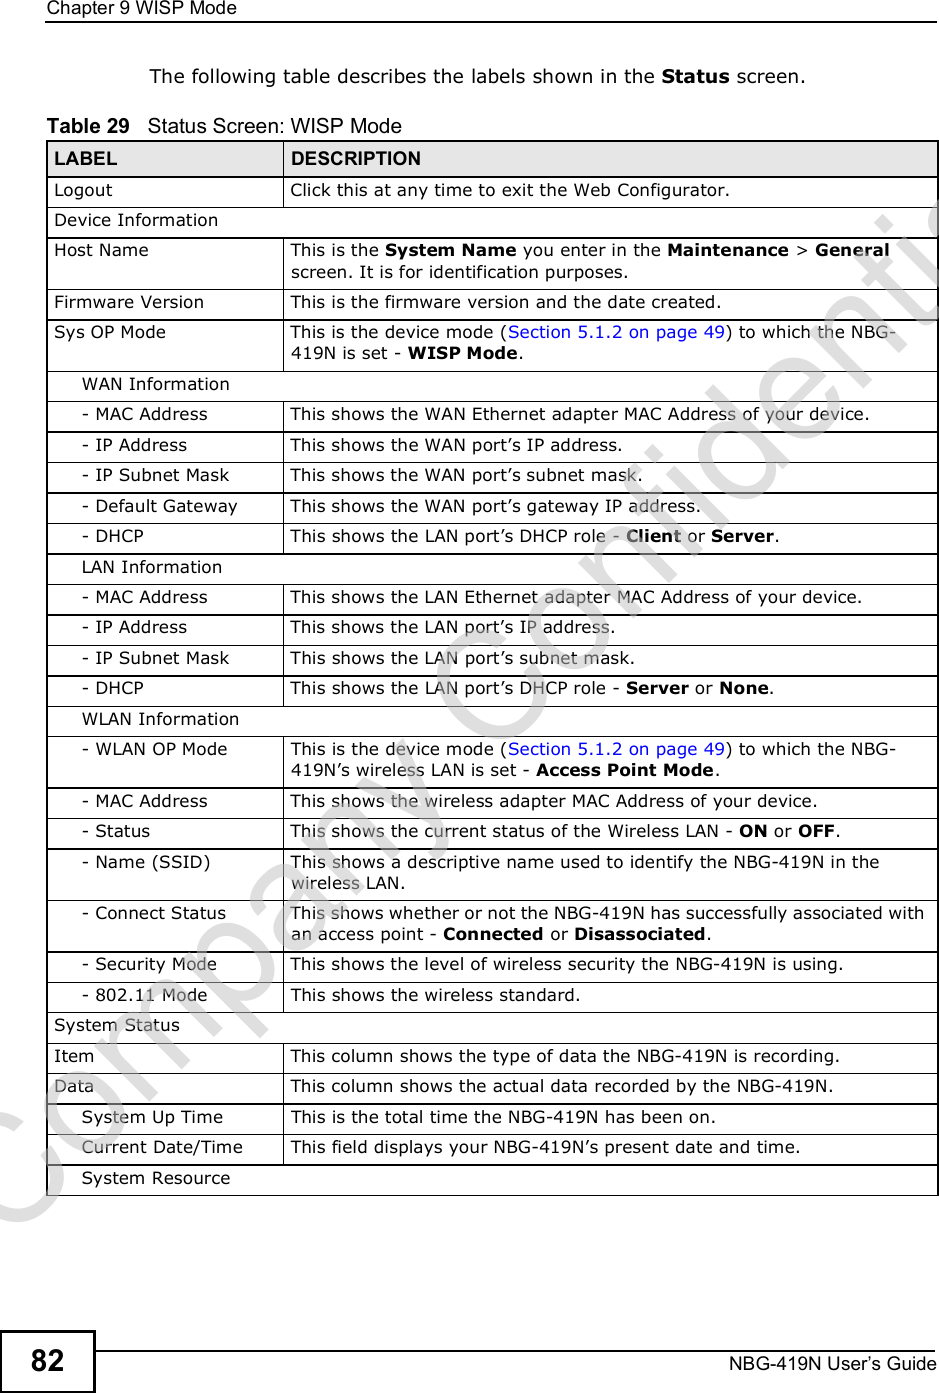 Chapter 9WISP ModeNBG-419N User s Guide82The following table describes the labels shown in the Status screen.Table 29   Status Screen: WISP Mode LABEL DESCRIPTIONLogoutClick this at any time to exit the Web Configurator.Device InformationHost NameThis is the System Name you enter in the Maintenance &gt; General screen. It is for identification purposes.Firmware VersionThis is the firmware version and the date created. Sys OP ModeThis is the device mode (Section 5.1.2 on page 49) to which the NBG-419N is set - WISP Mode.WAN Information- MAC AddressThis shows the WAN Ethernet adapter MAC Address of your device.- IP AddressThis shows the WAN port!s IP address.- IP Subnet MaskThis shows the WAN port!s subnet mask.- Default GatewayThis shows the WAN port!s gateway IP address.- DHCPThis shows the LAN port!s DHCP role - Client or Server.LAN Information- MAC AddressThis shows the LAN Ethernet adapter MAC Address of your device.- IP AddressThis shows the LAN port!s IP address.- IP Subnet MaskThis shows the LAN port!s subnet mask.- DHCPThis shows the LAN port!s DHCP role - Server or None.WLAN Information- WLAN OP ModeThis is the device mode (Section 5.1.2 on page 49) to which the NBG-419N!s wireless LAN is set - Access Point Mode.- MAC AddressThis shows the wireless adapter MAC Address of your device.- StatusThis shows the current status of the Wireless LAN - ON or OFF.- Name (SSID)This shows a descriptive name used to identify the NBG-419N in the wireless LAN. - Connect StatusThis shows whether or not the NBG-419N has successfully associated with an access point - Connected or Disassociated.- Security ModeThis shows the level of wireless security the NBG-419N is using.- 802.11 ModeThis shows the wireless standard.System StatusItemThis column shows the type of data the NBG-419N is recording.DataThis column shows the actual data recorded by the NBG-419N.System Up TimeThis is the total time the NBG-419N has been on.Current Date/TimeThis field displays your NBG-419N!s present date and time.System ResourceCompany Confidential